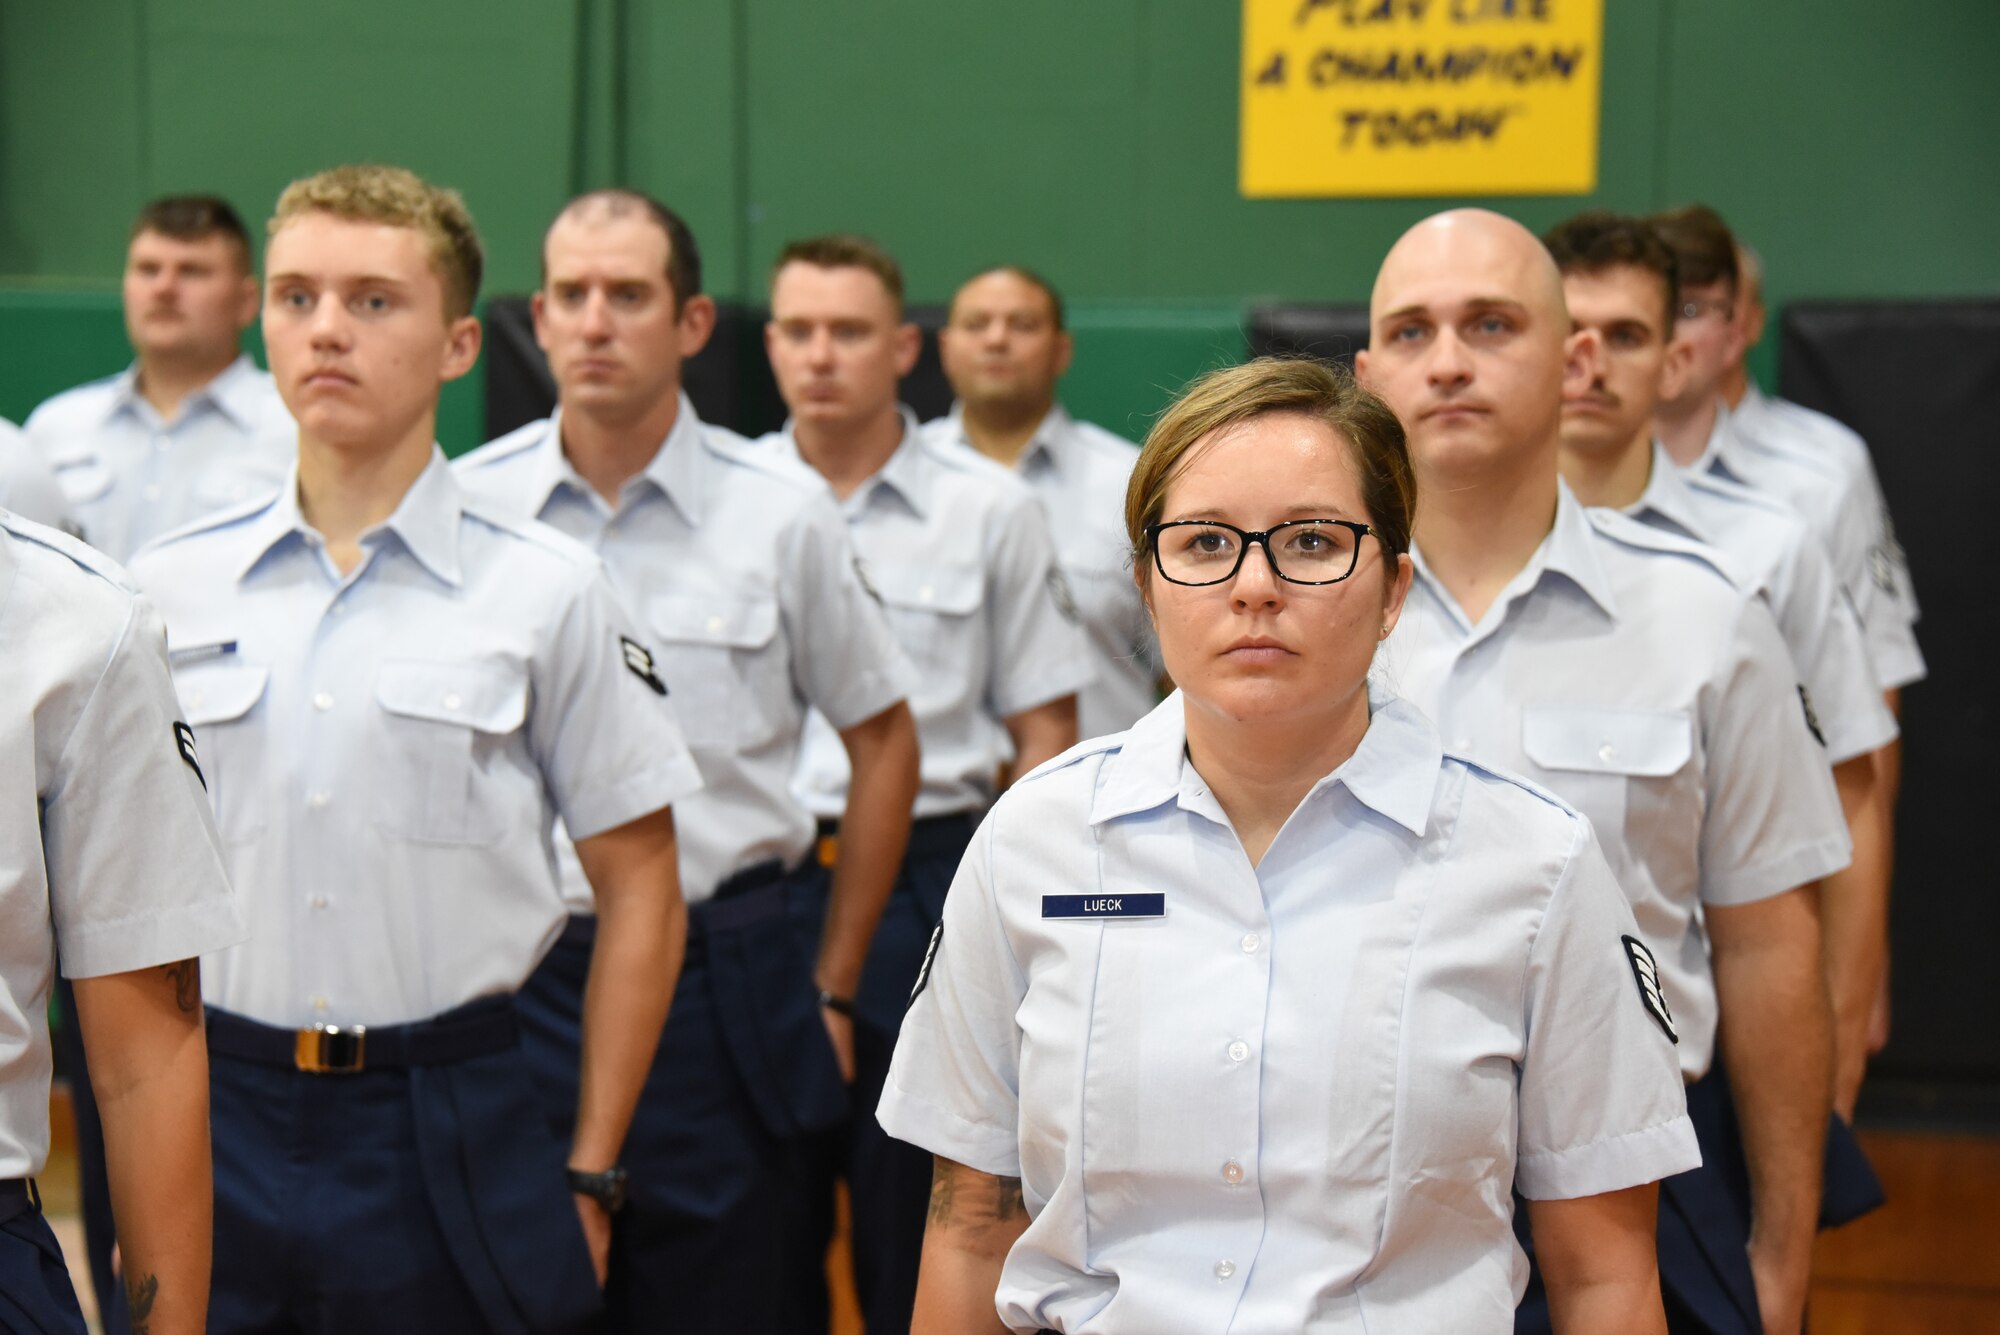 Airmen stand in formation